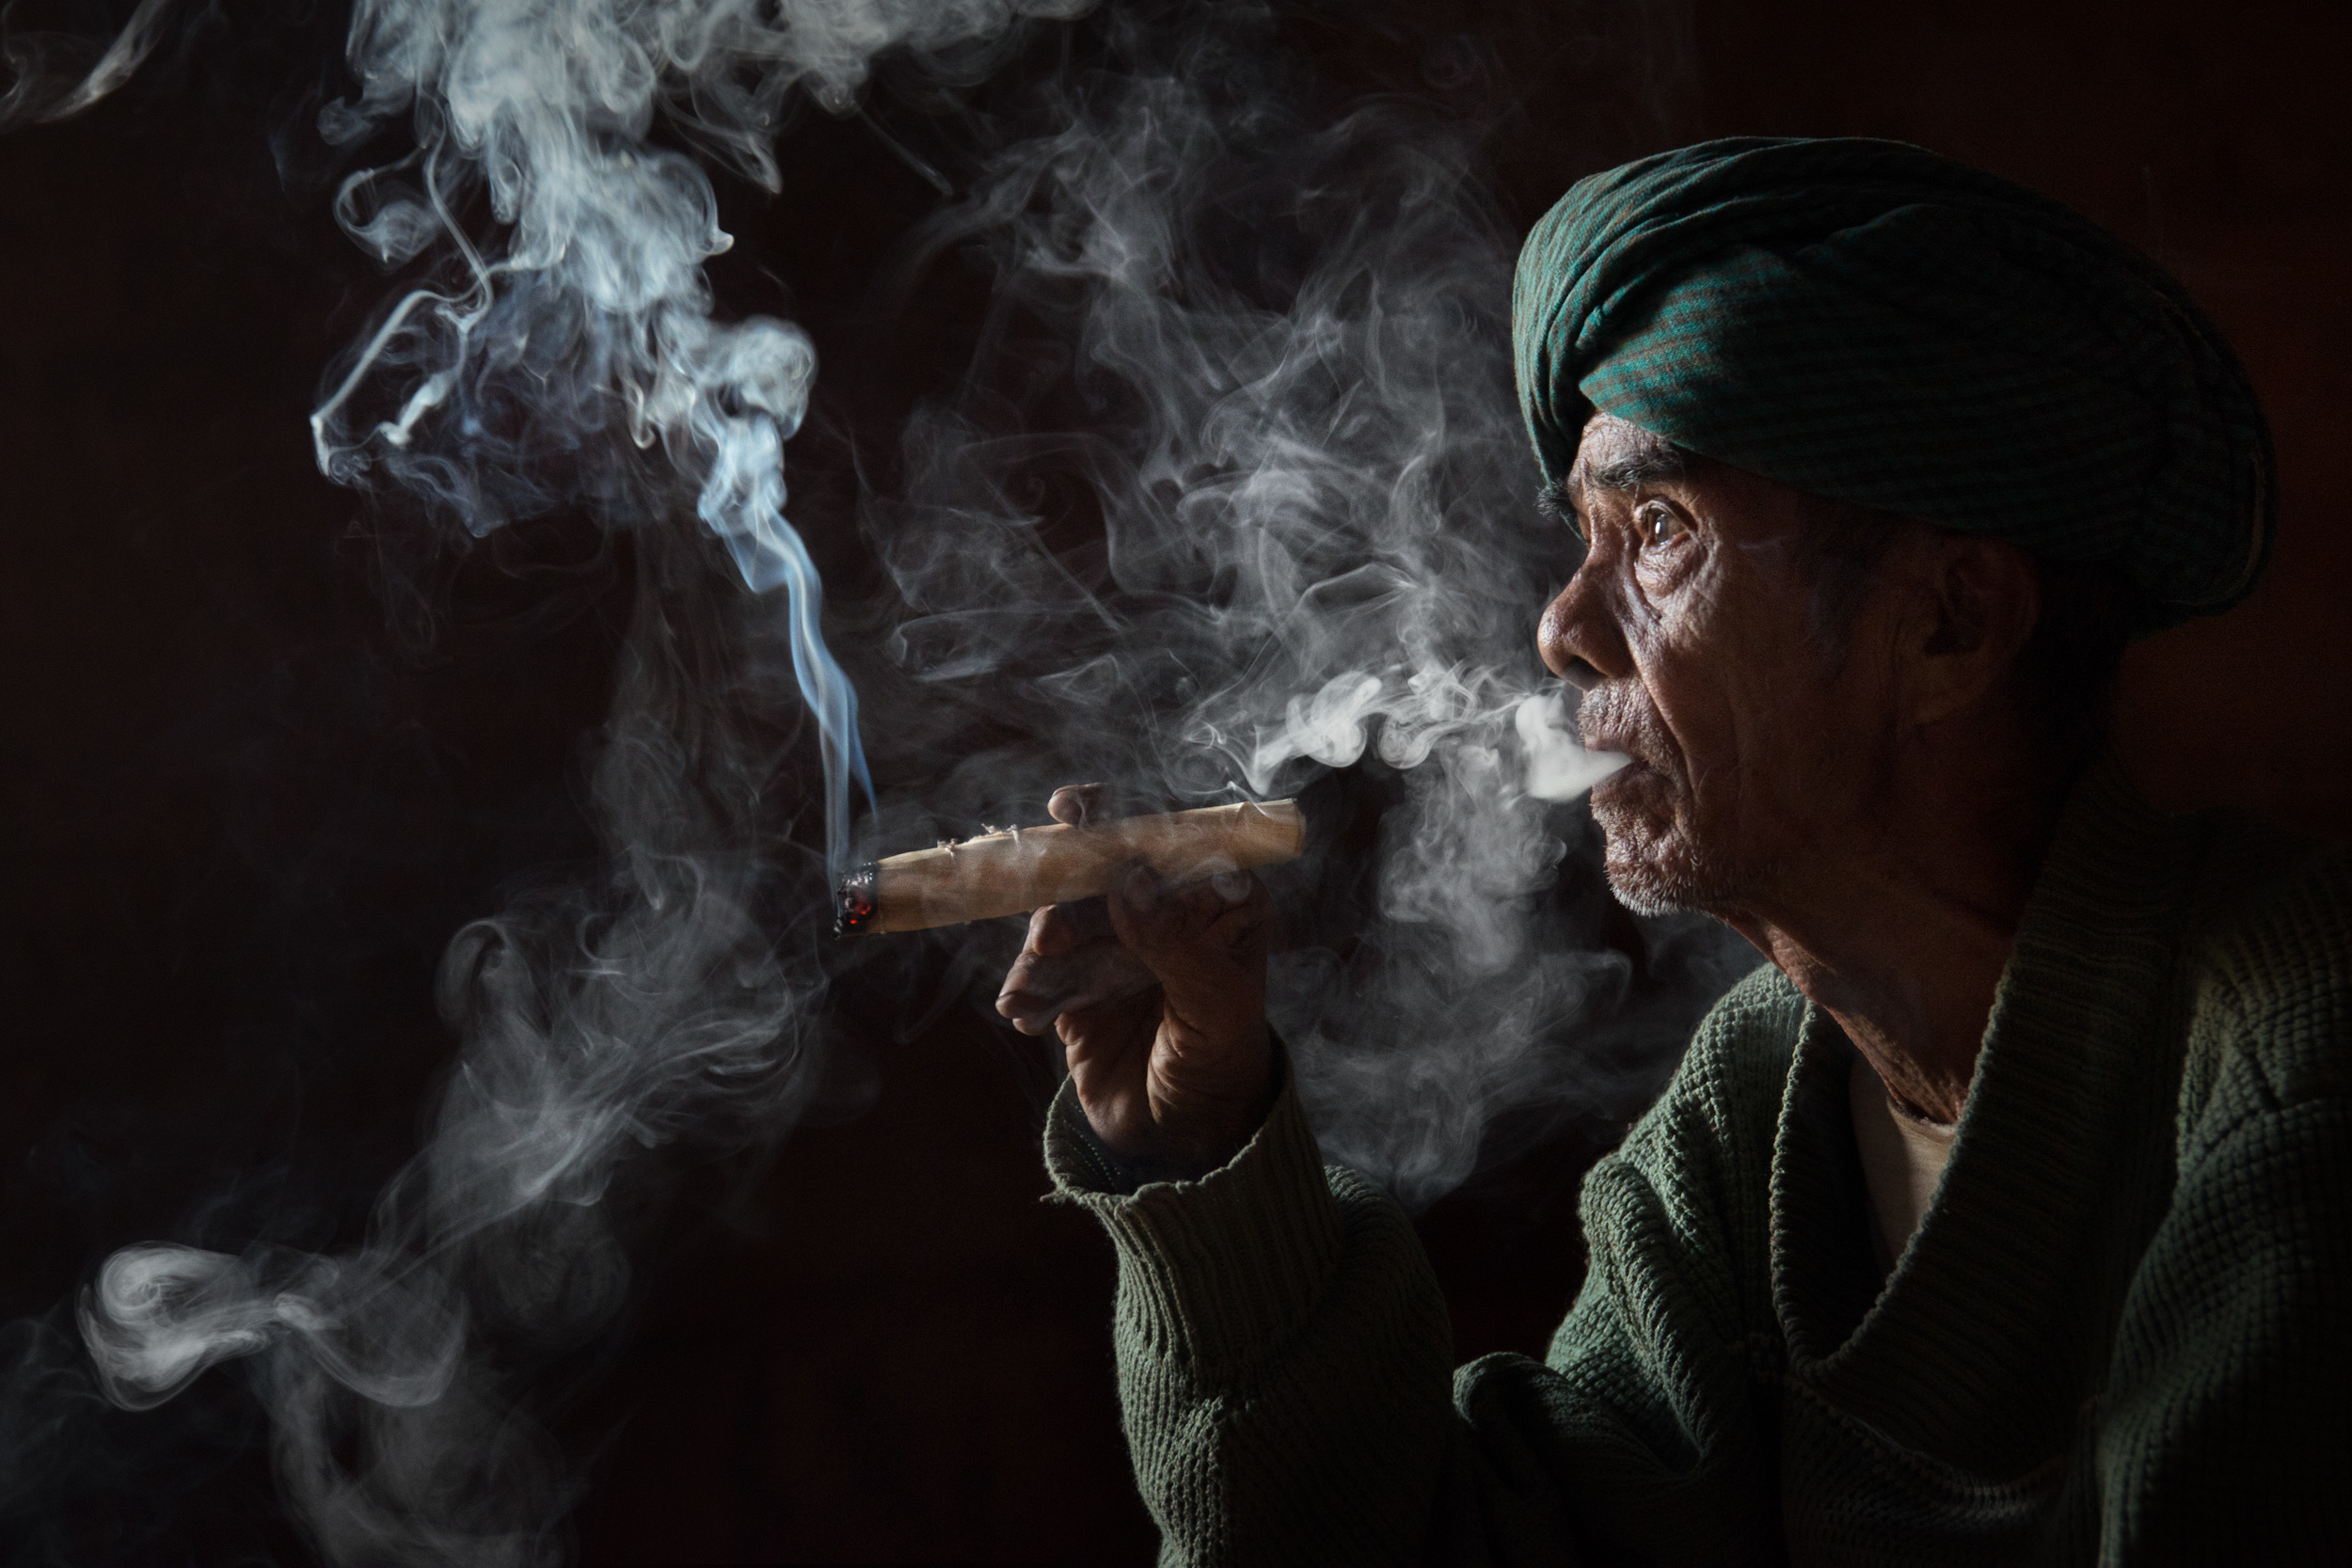 A side view of a man holding a cheroot with smoke curling off it